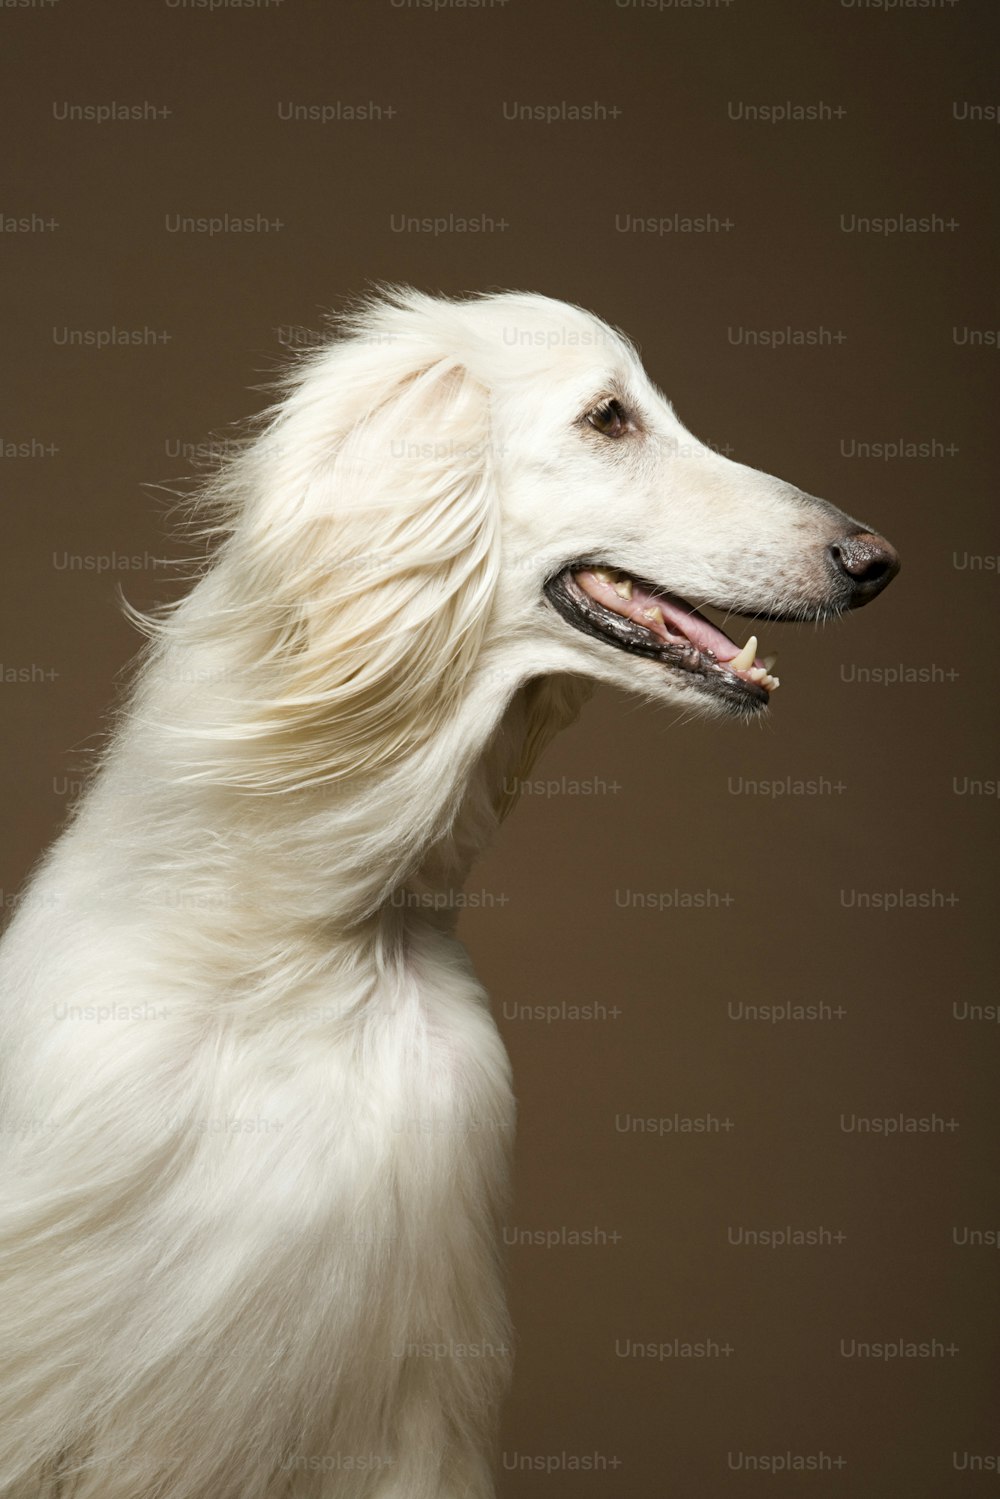 a white dog with long hair standing in front of a brown background